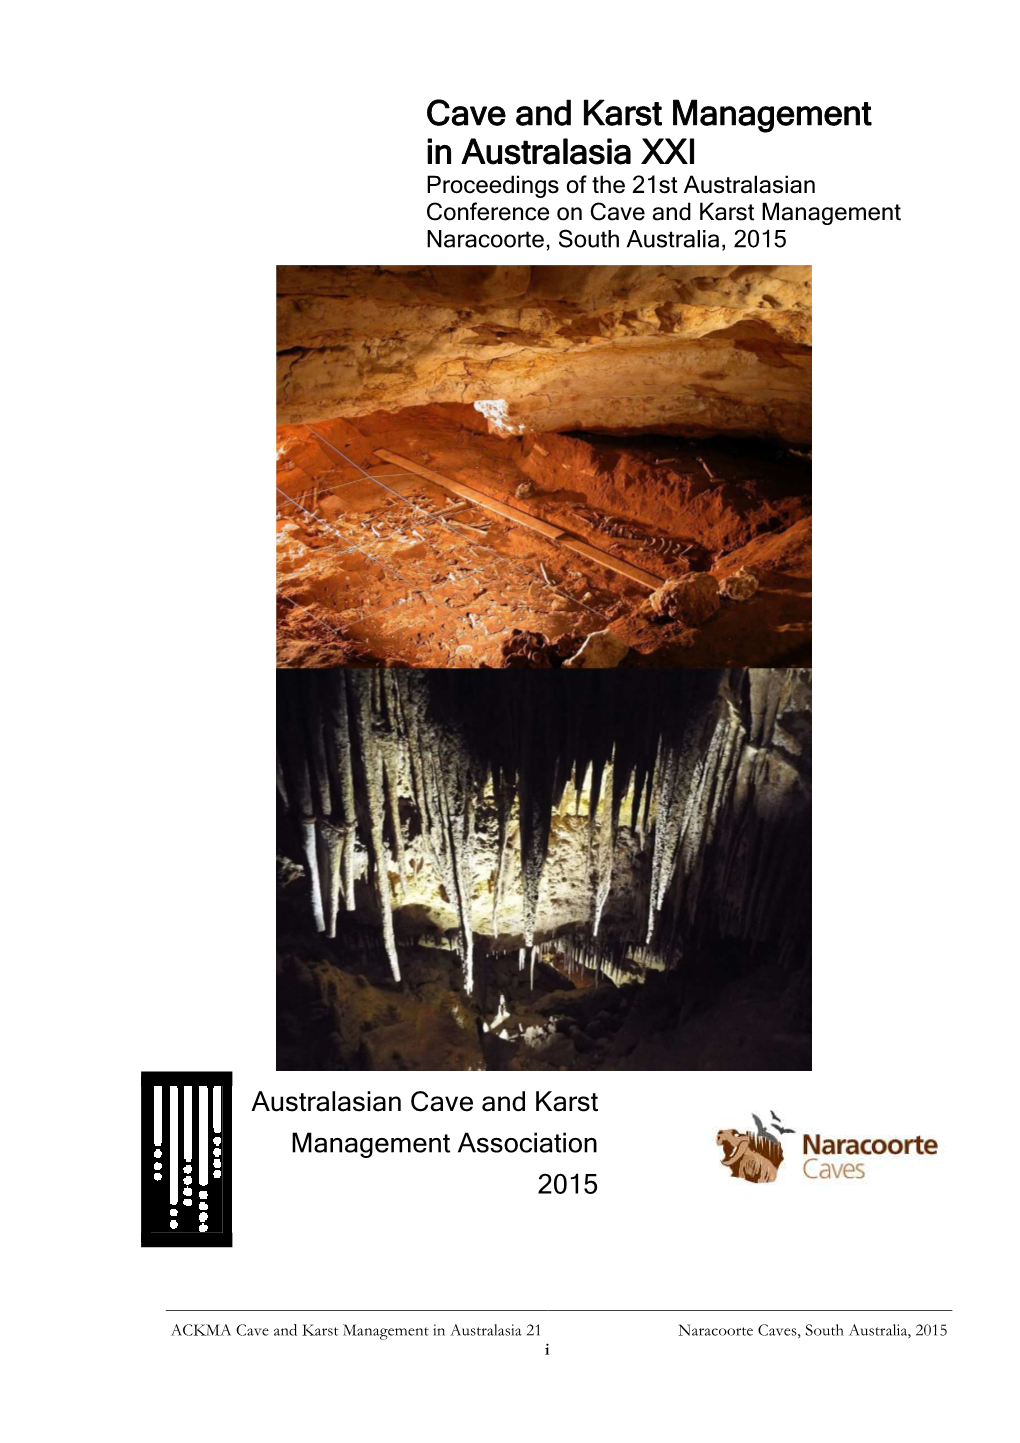 Cave and Karst Management in Australasia XX I Proceedings of the 21St Australasian Conference on Cave and Karst Management Naracoorte, South Australia, 2015